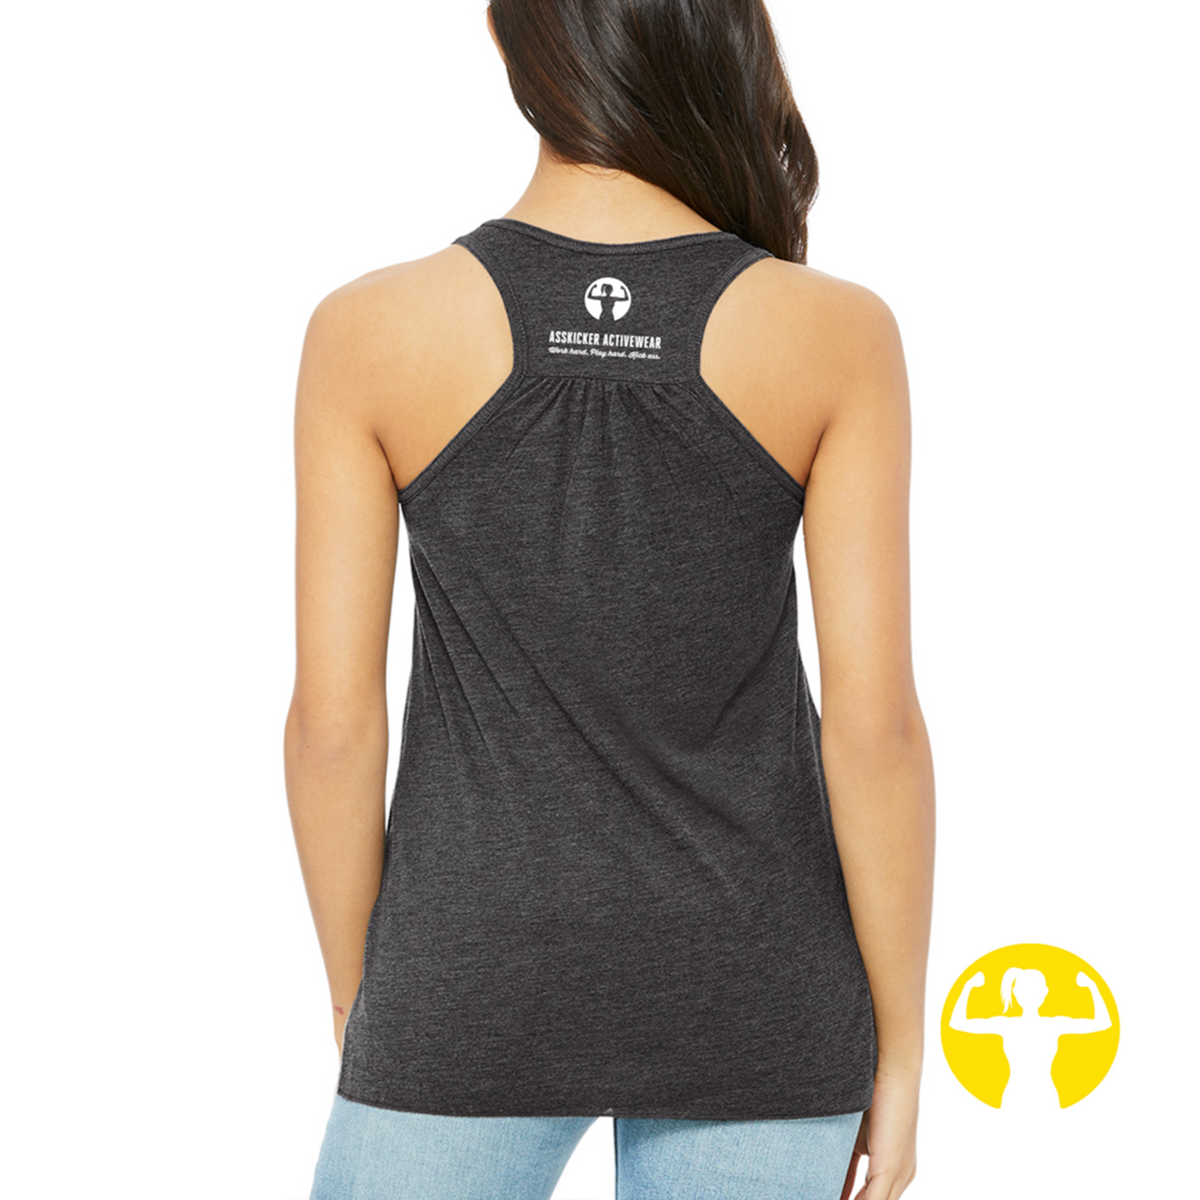  Workout Tank Tops For Women Loose Fit Yoga Shirts Athletic  Top High Neck Racerback Tank Tops Cute Work Out Clothes Gym Tee Shirt Long  Flowy Tank For Women Wine Red